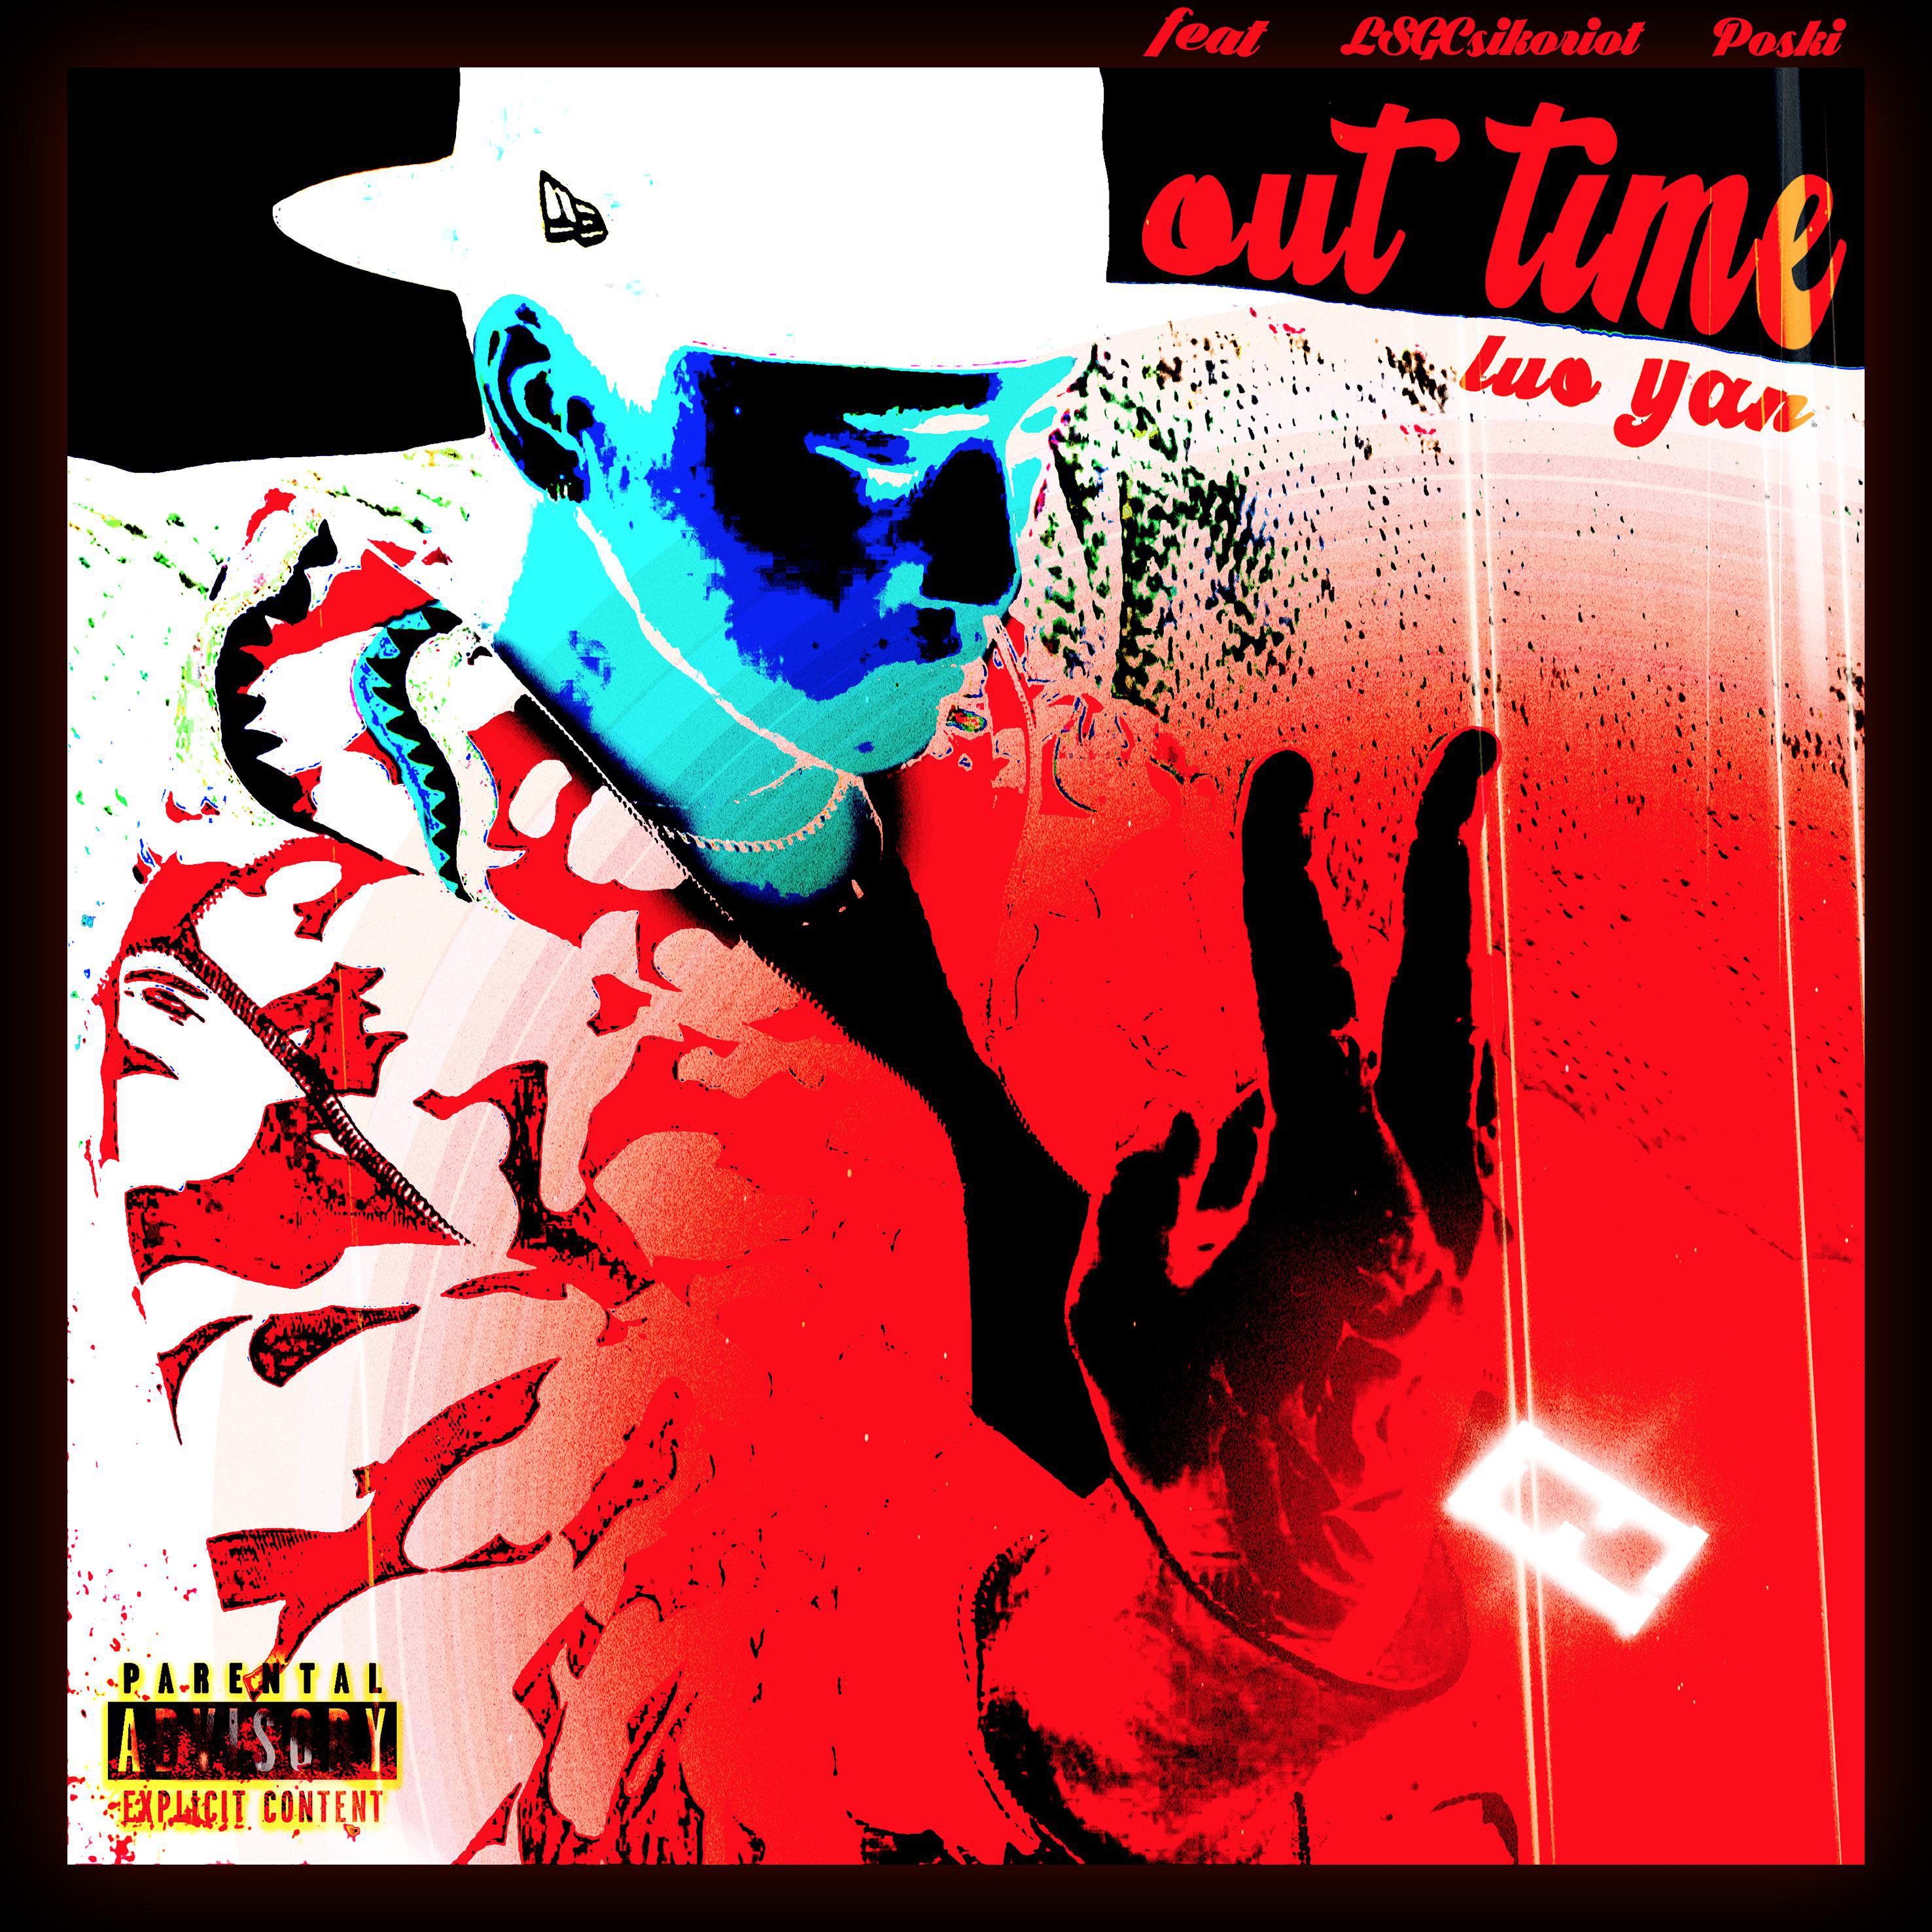 Our time（Prod by waytoolost）歌词 歌手罗言 / LSGCsikoriot / Poski-专辑Our time-单曲《Our time（Prod by waytoolost）》LRC歌词下载